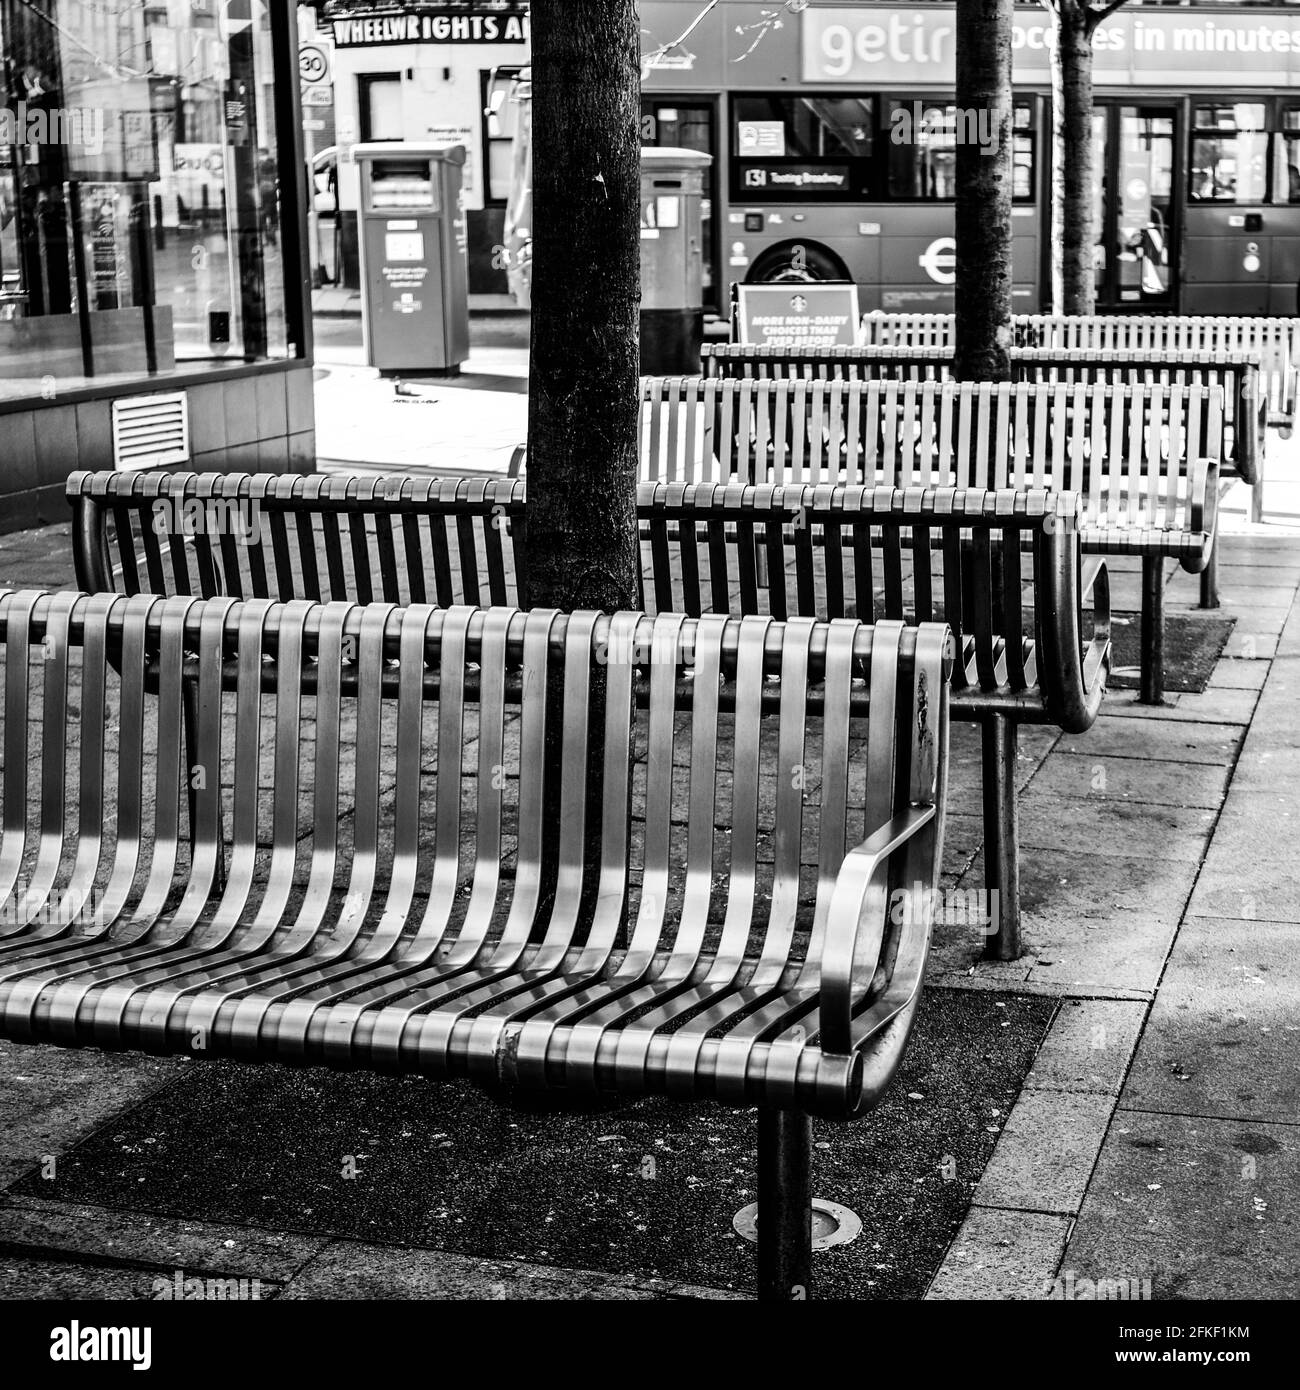 Kingston Upon Thames, London UK, April 2021, Modern Architectural Steel Public Seating Benches With No People Stock Photo